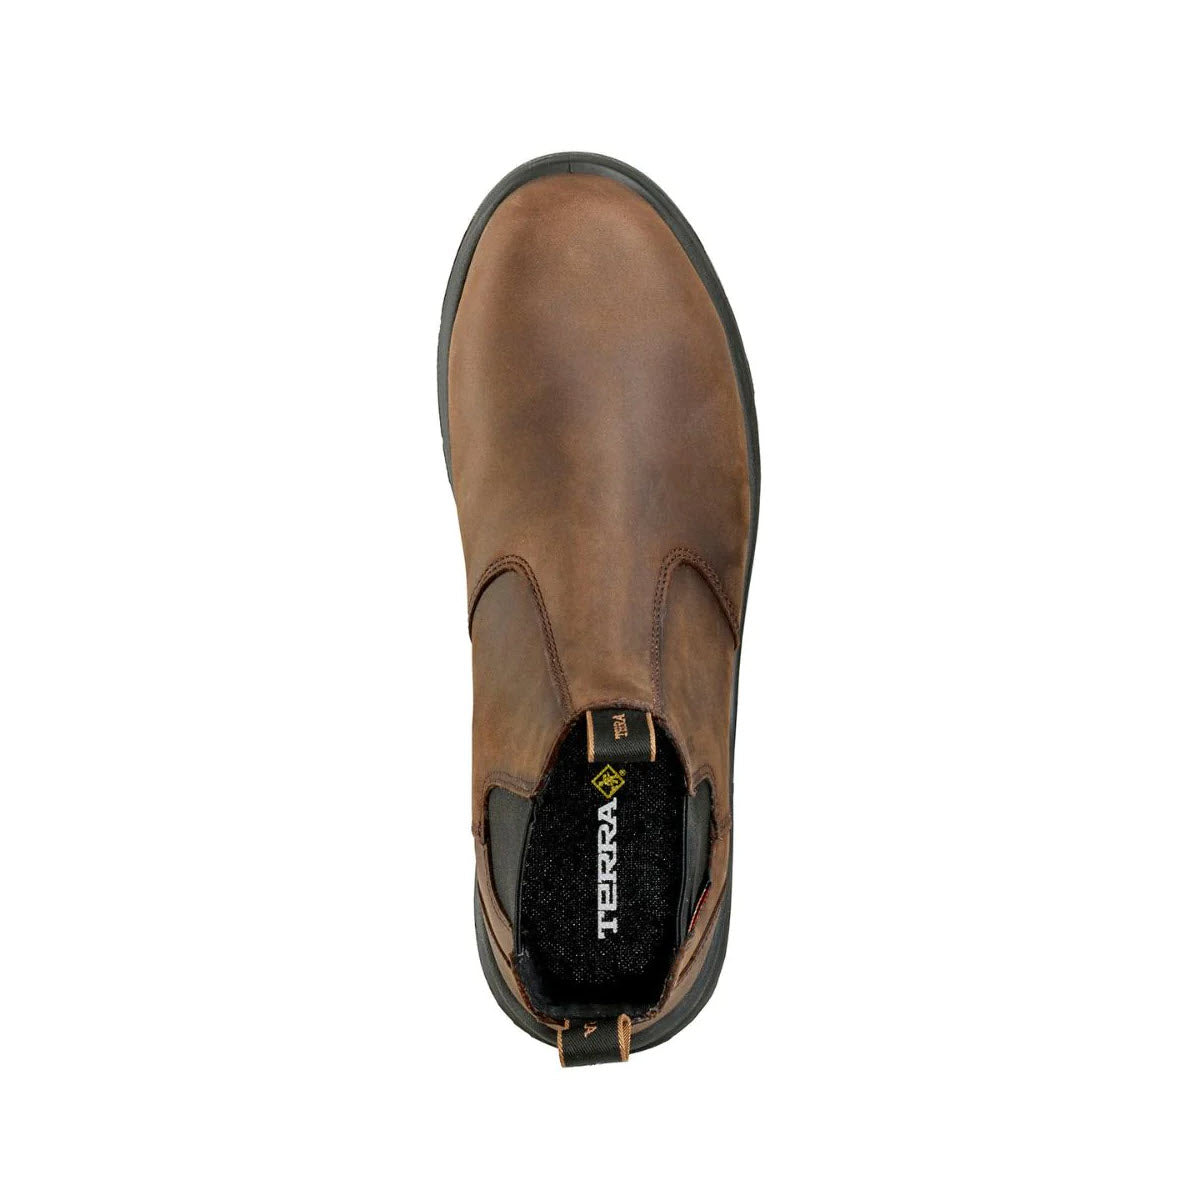 Top view of a dark brown leather Terra Composite Toe Murphy Waterproof Chelsea boot with black elastic side panels and odour fighting technology on a white background.